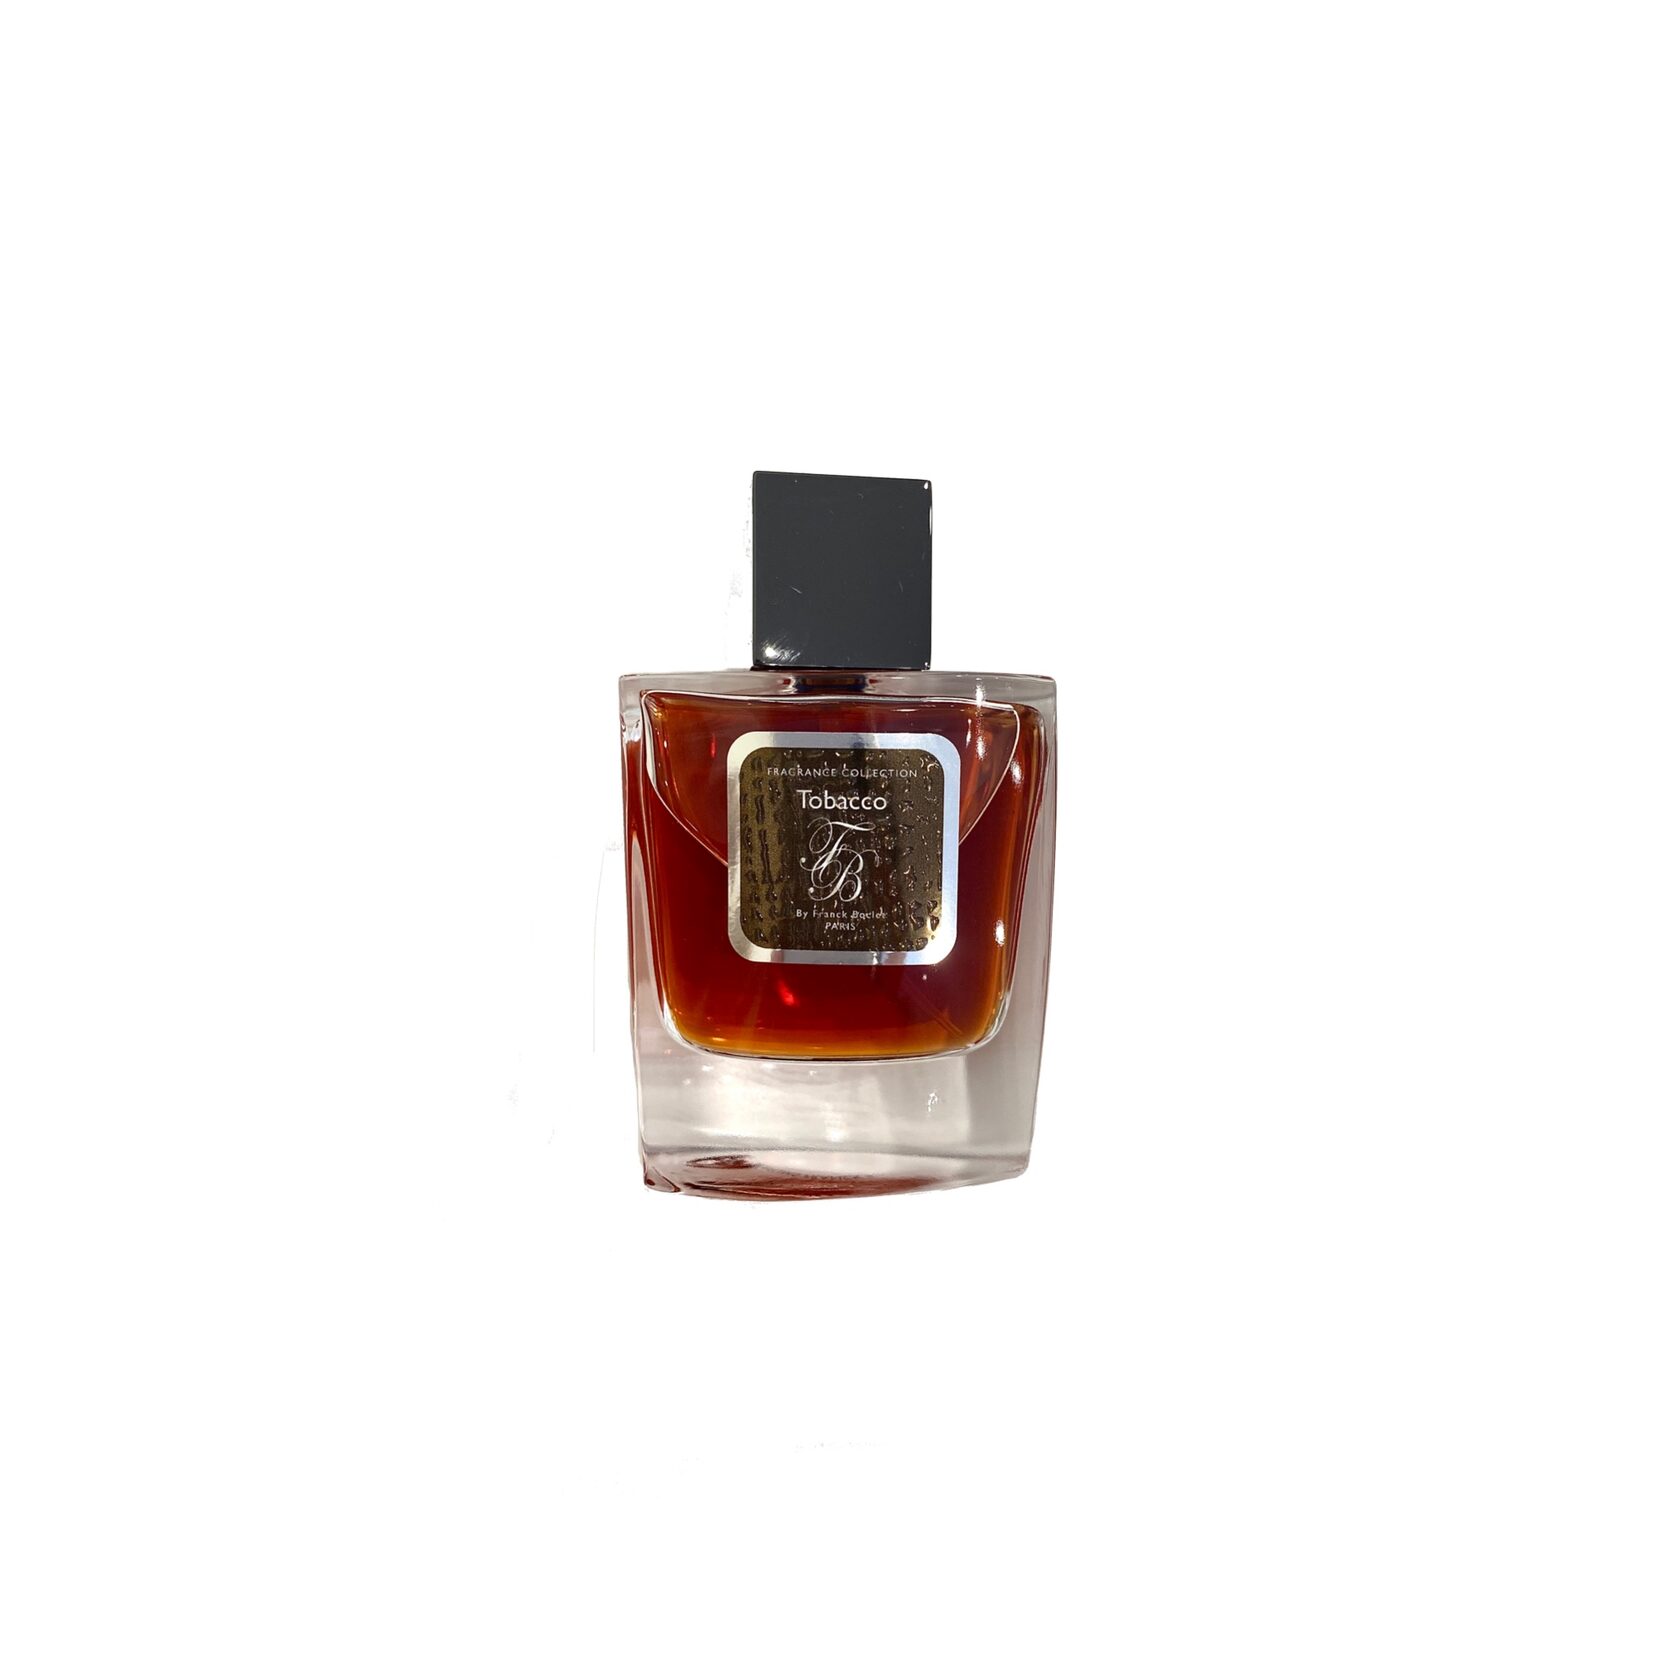 Boclet nirvana. Franck Boclet Tobacco. Franck Boclet Tobacco 20ml. Тобакко Франк Бокле 20 мл. Духи табако Франк Бокле женские.